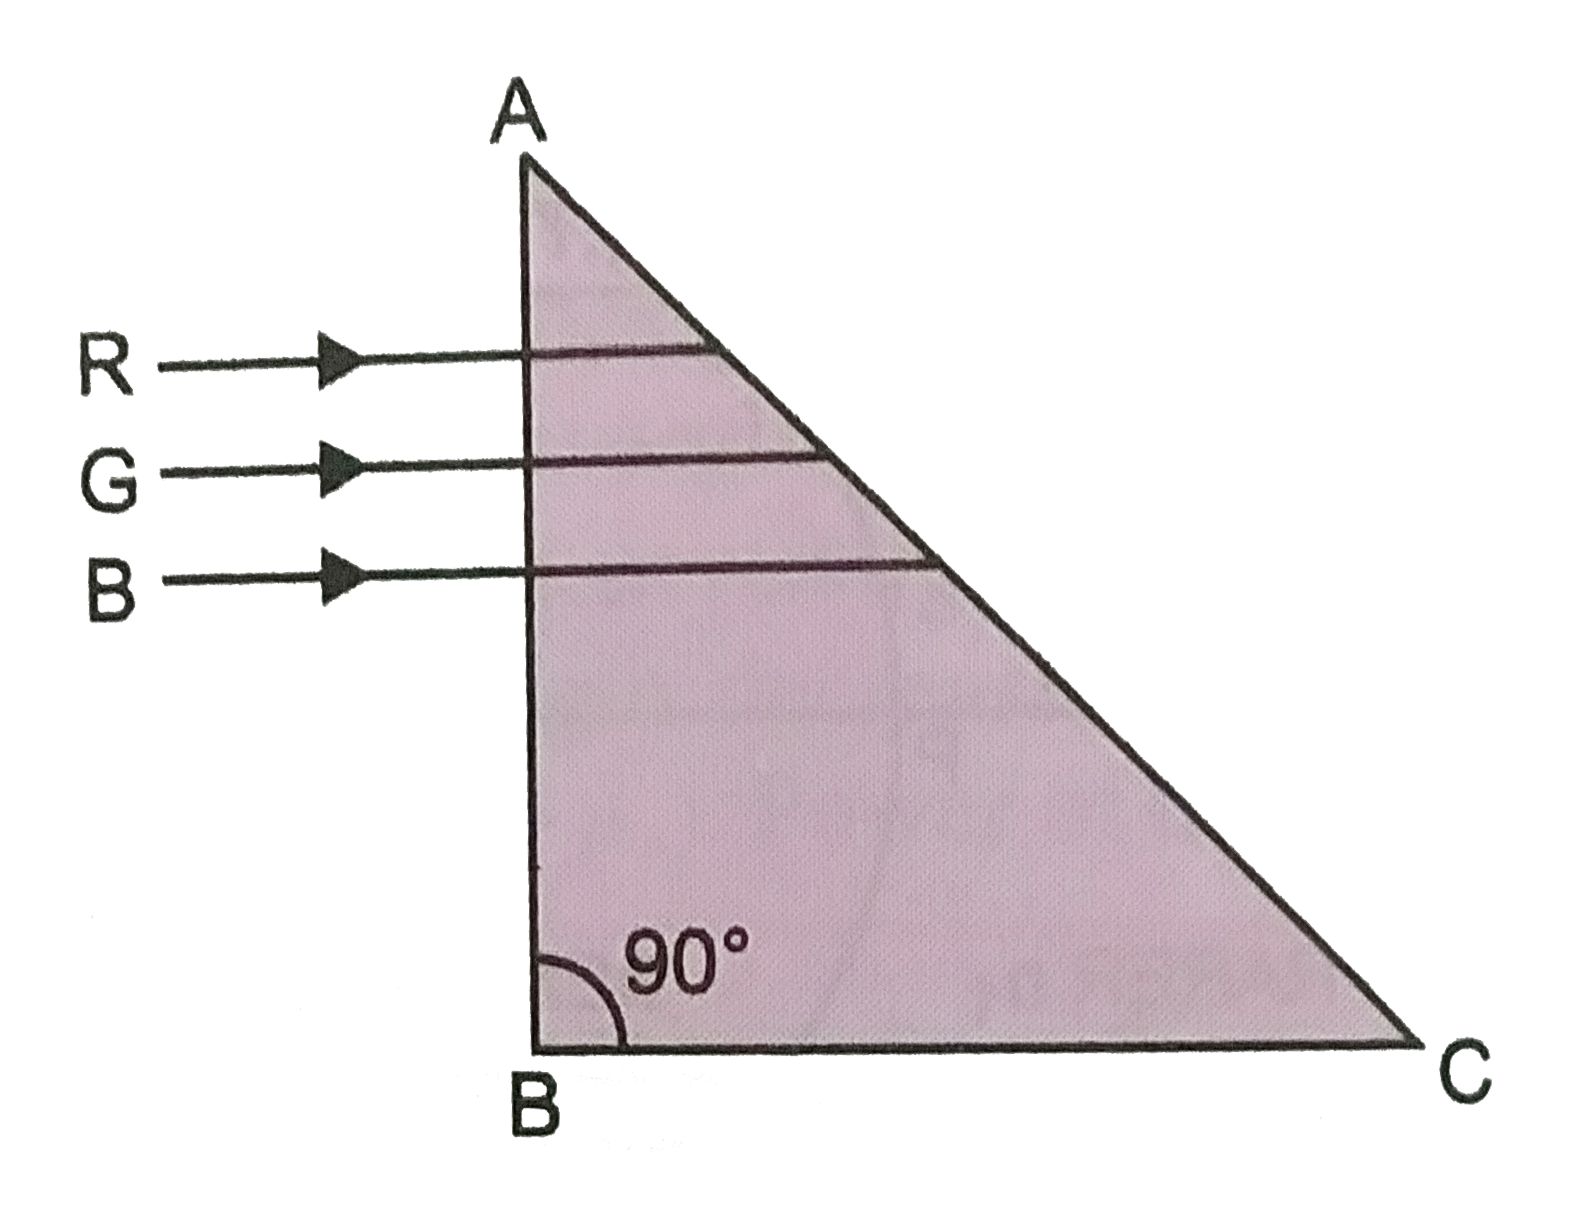 In Fig. 6(b).80, light rays of blue, green and red wavelength are incident on an isoscels right angled prism. Explain with reason which ray of light will be transmitted through the face AC. The refractive index of the prism for red, green and blue light are 1.39, 1.424 and 1.476 respectively.